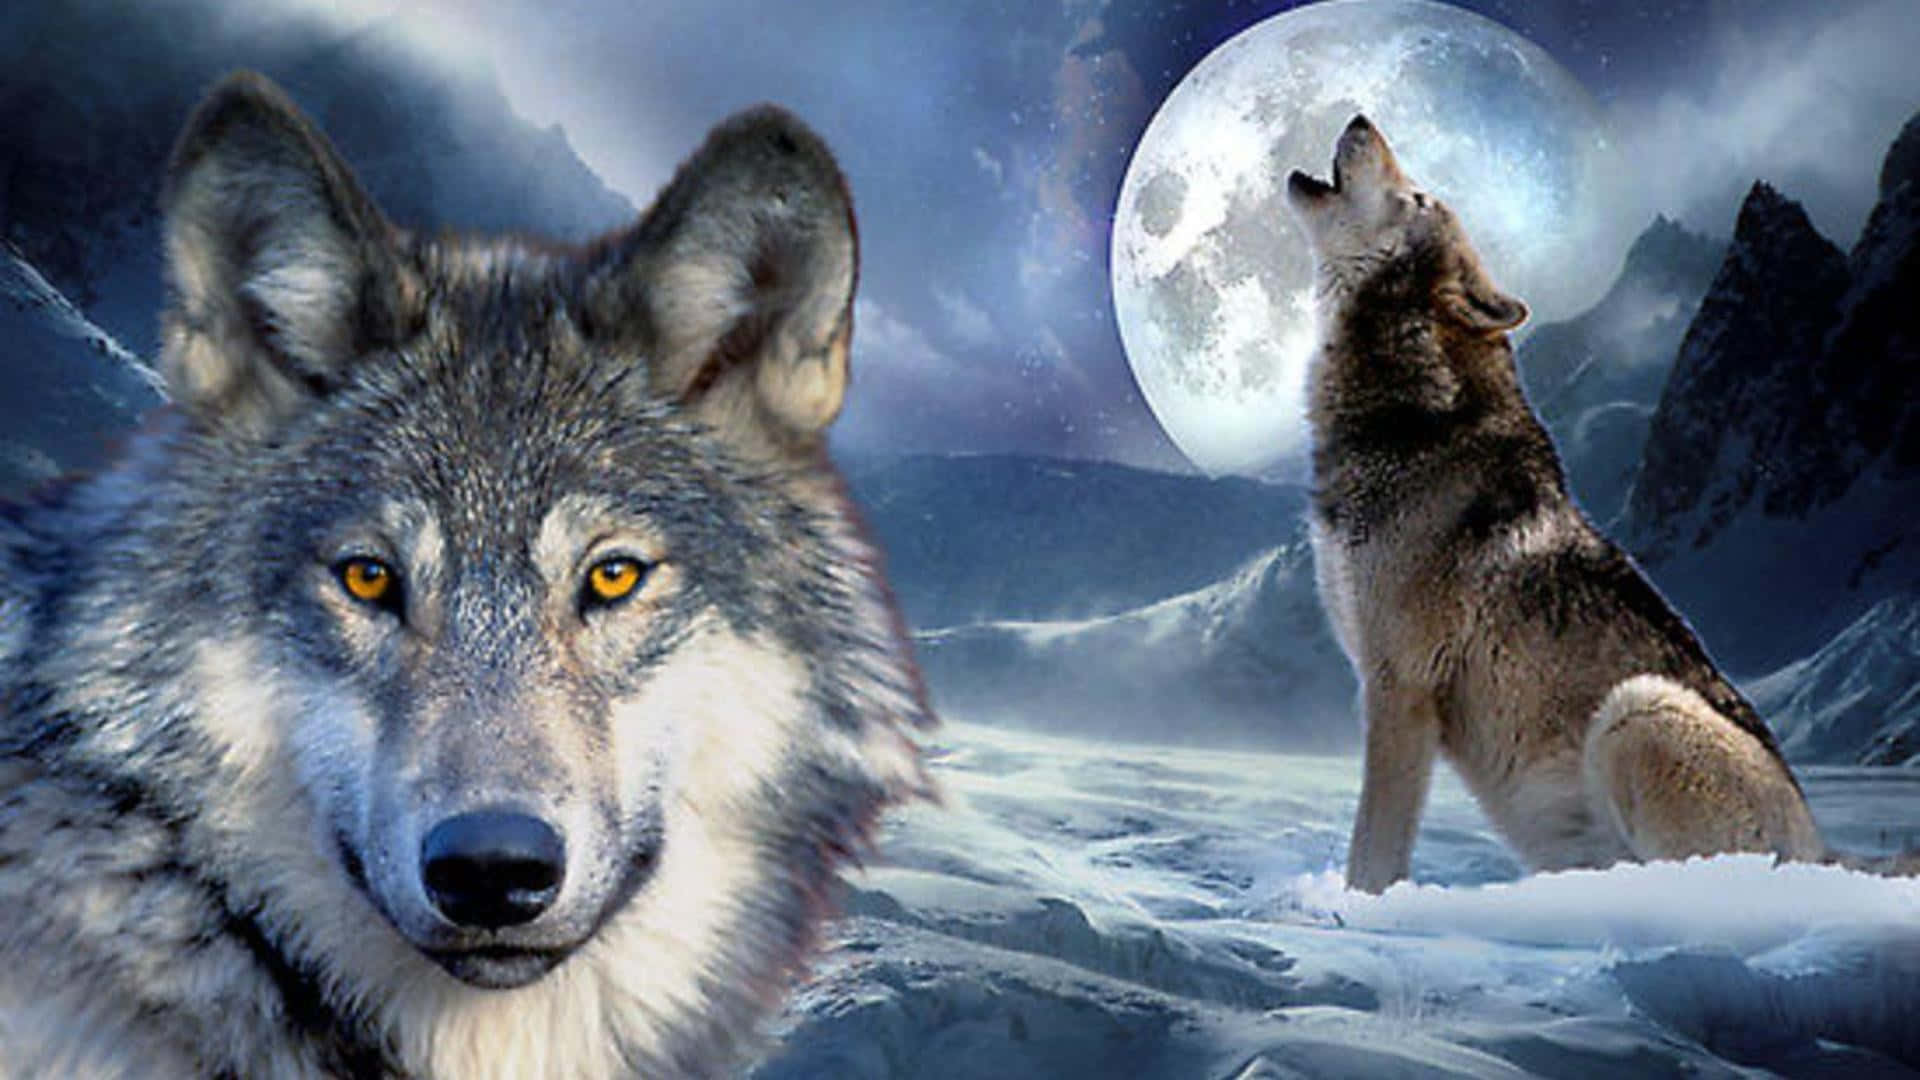 "Listen to the powerful howling of this majestic wolf"